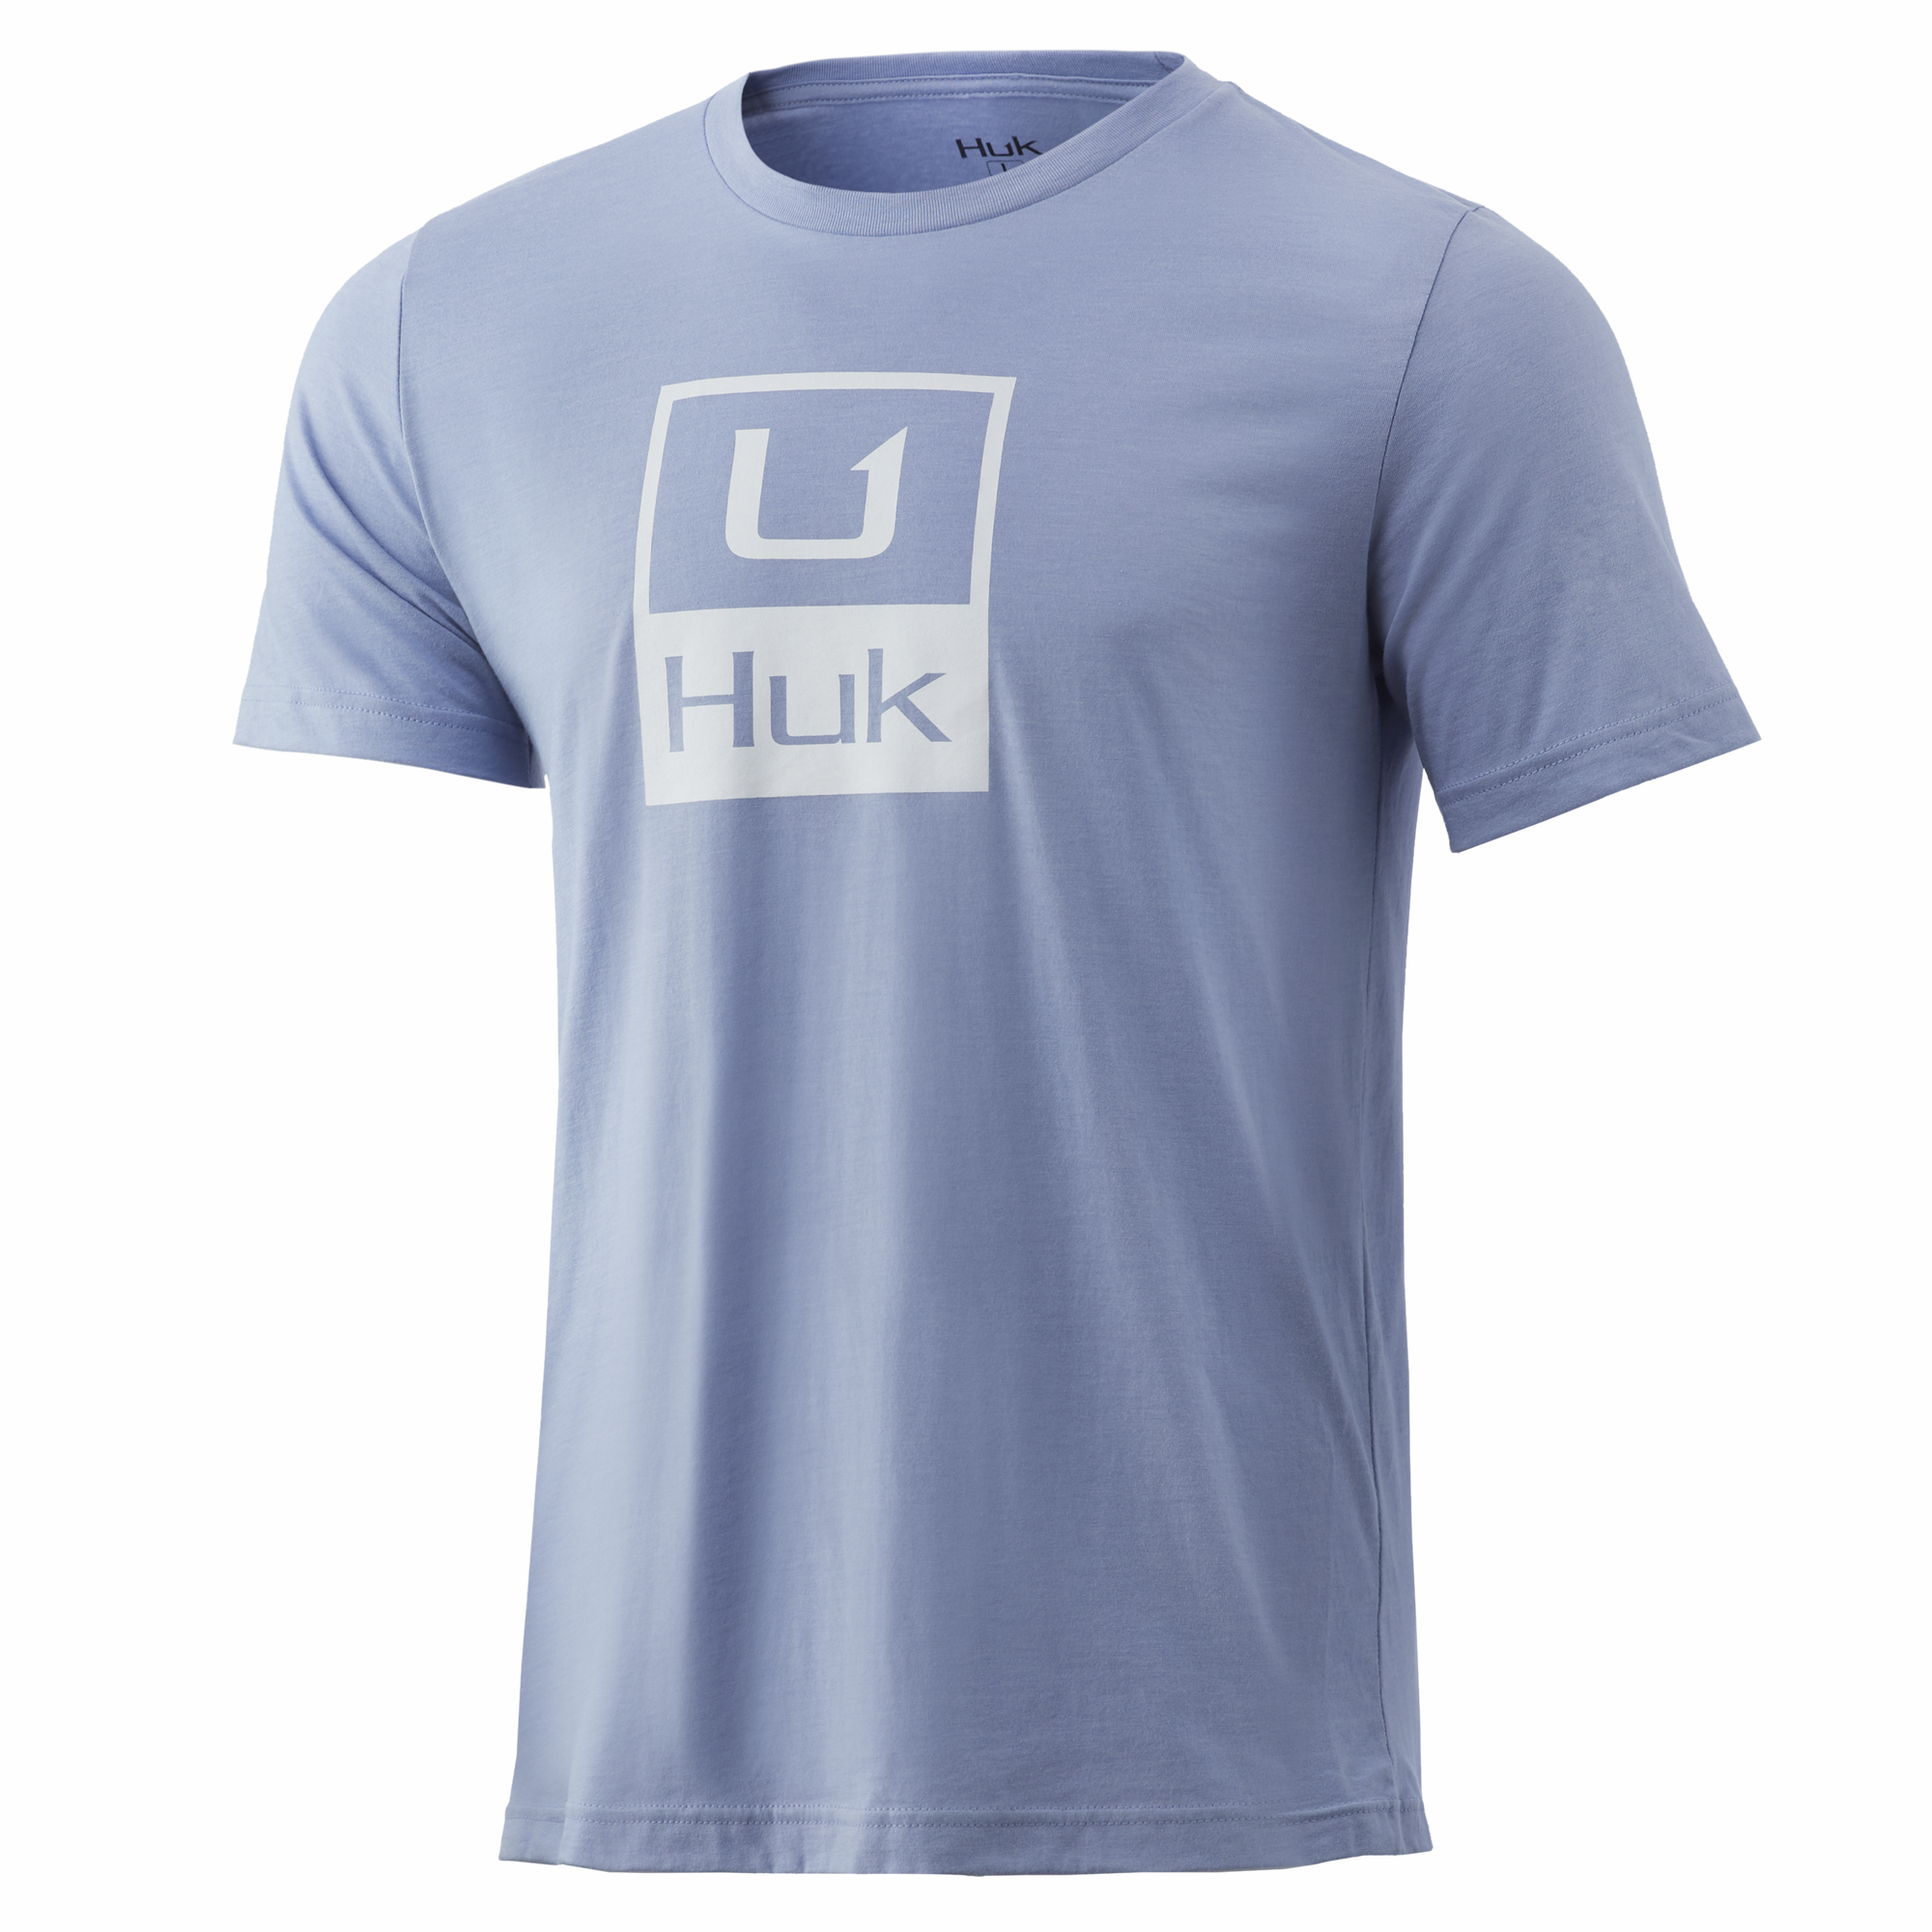 huk dusk bkue HTR up tee xlg - Les Boys Sports Excellence